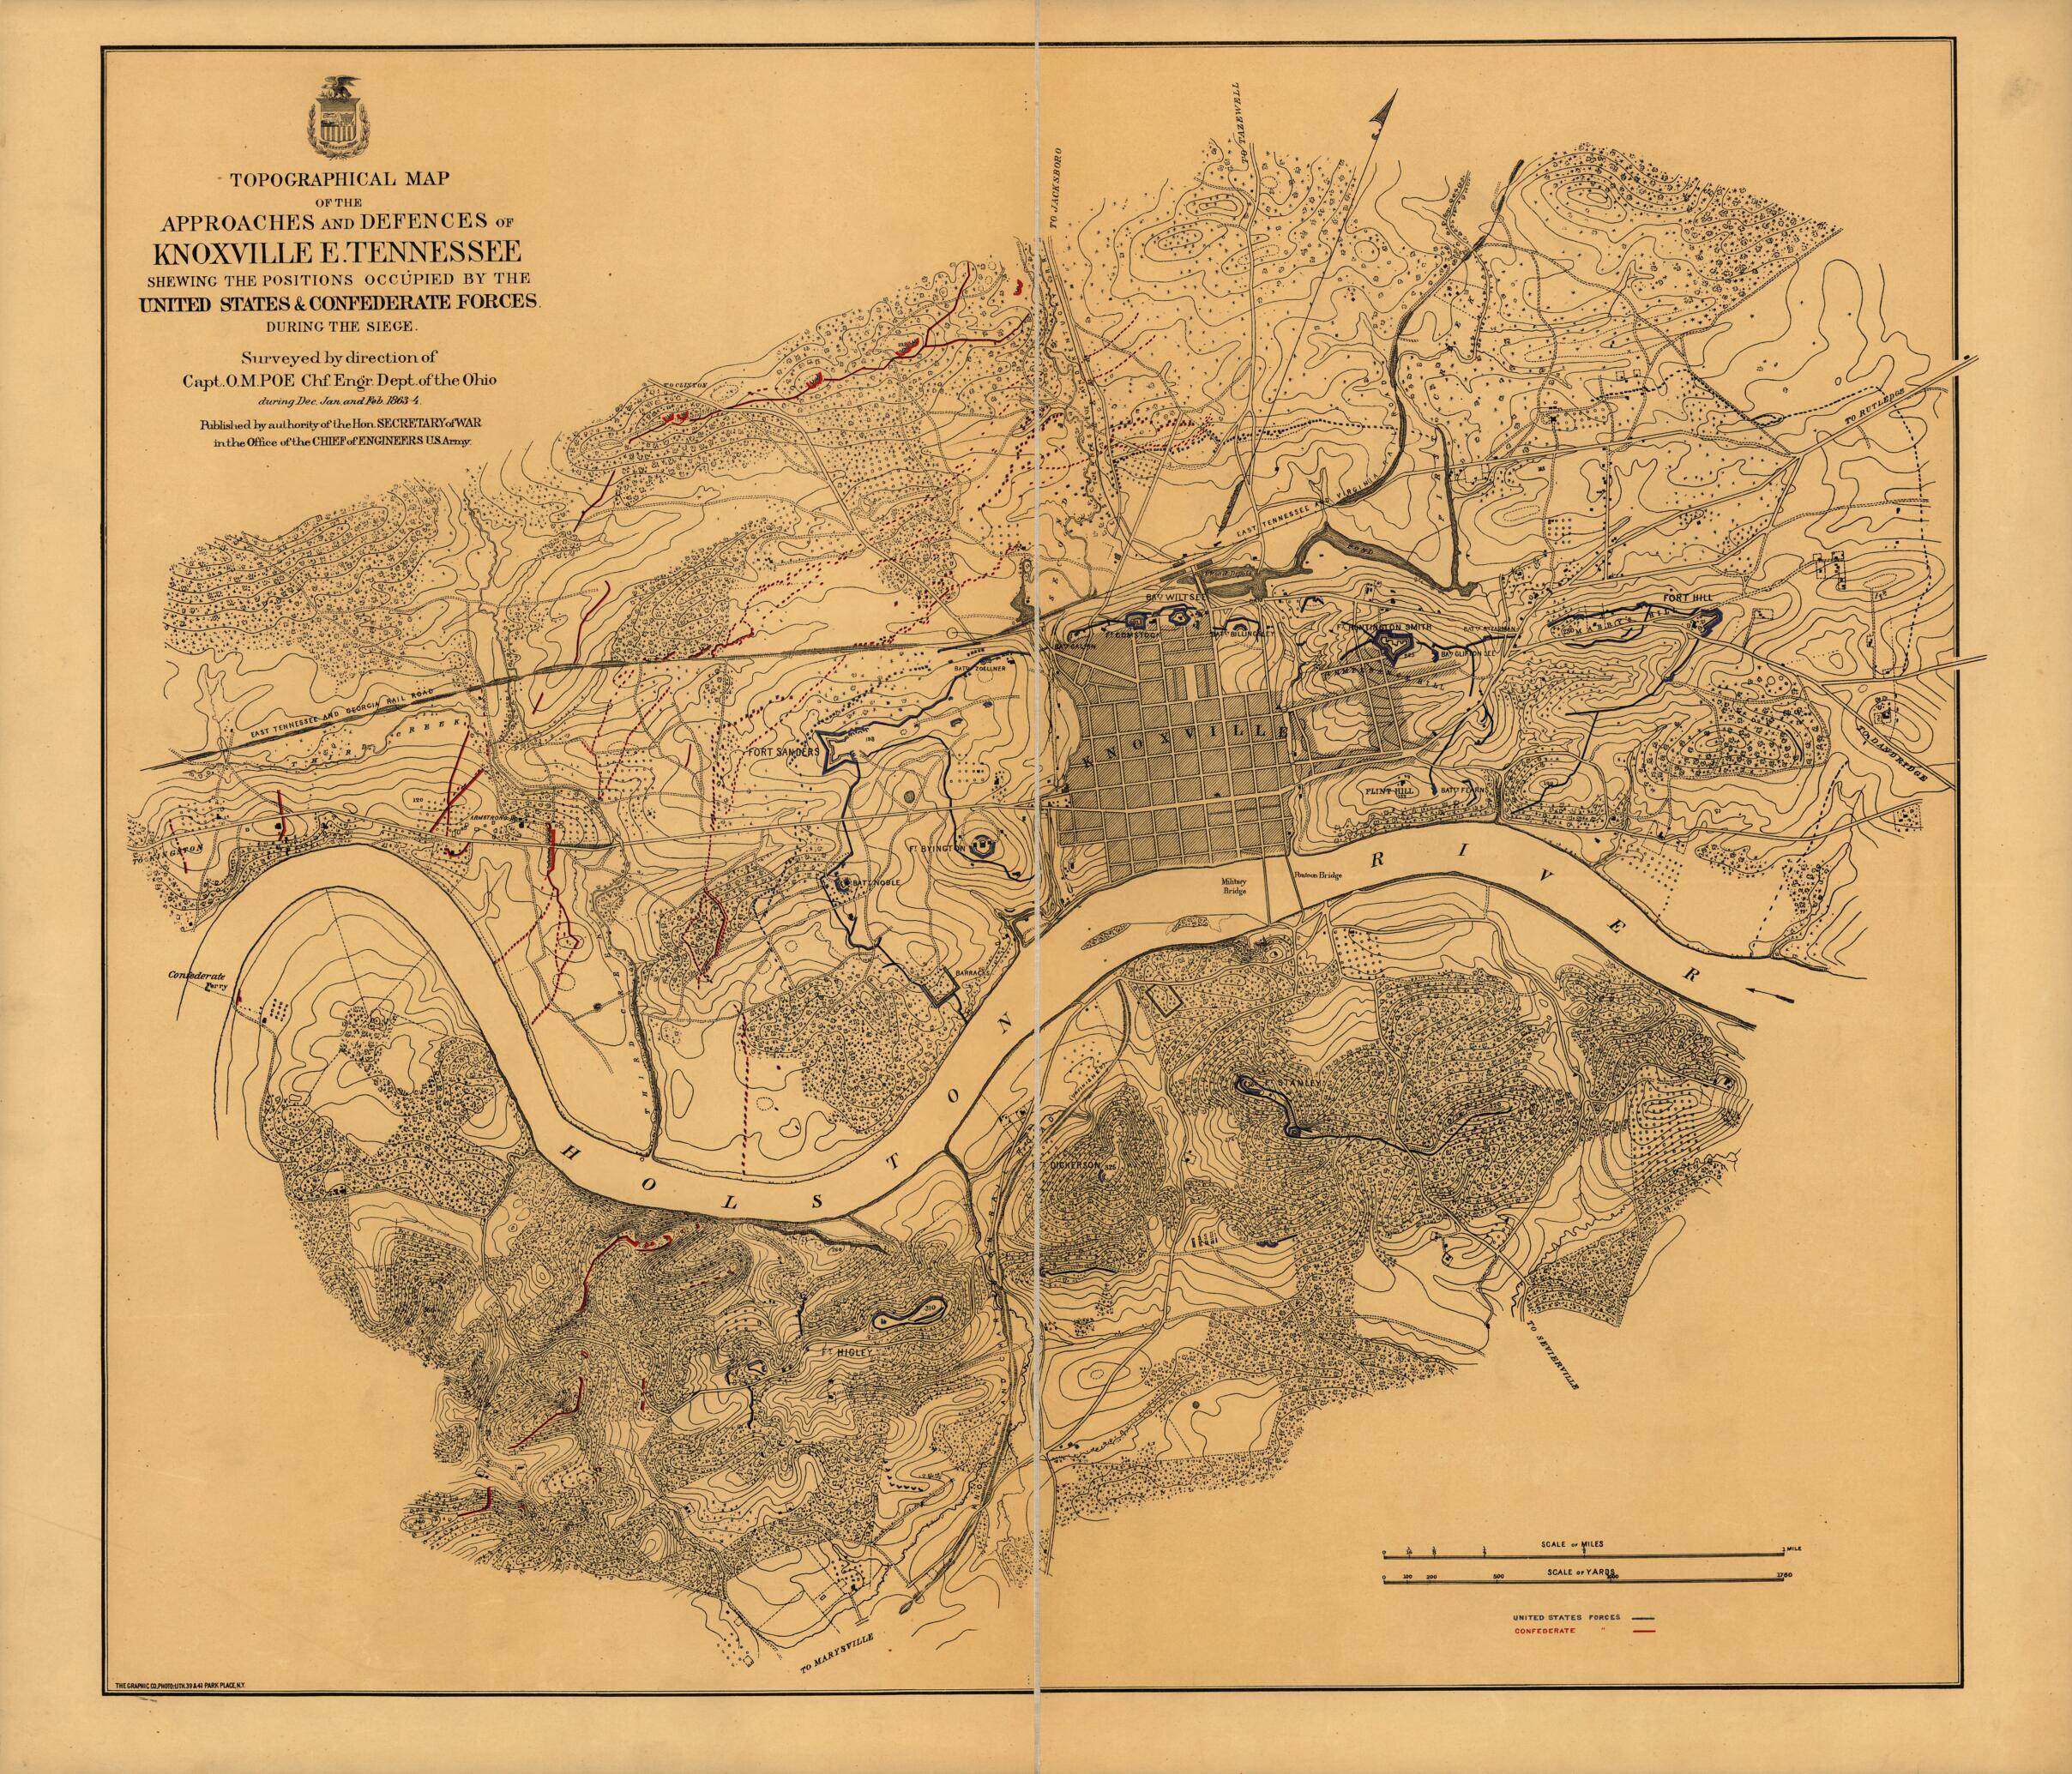 This old map of Topographical Map of the Approaches and Defences of Knoxville, E. Tennessee, Shewing the Positions Occupied by the United States &amp; Confederate Forces During the Siege from 1864 was created by O. M. (Orlando Metcalfe) Poe, Cleveland Rockwe